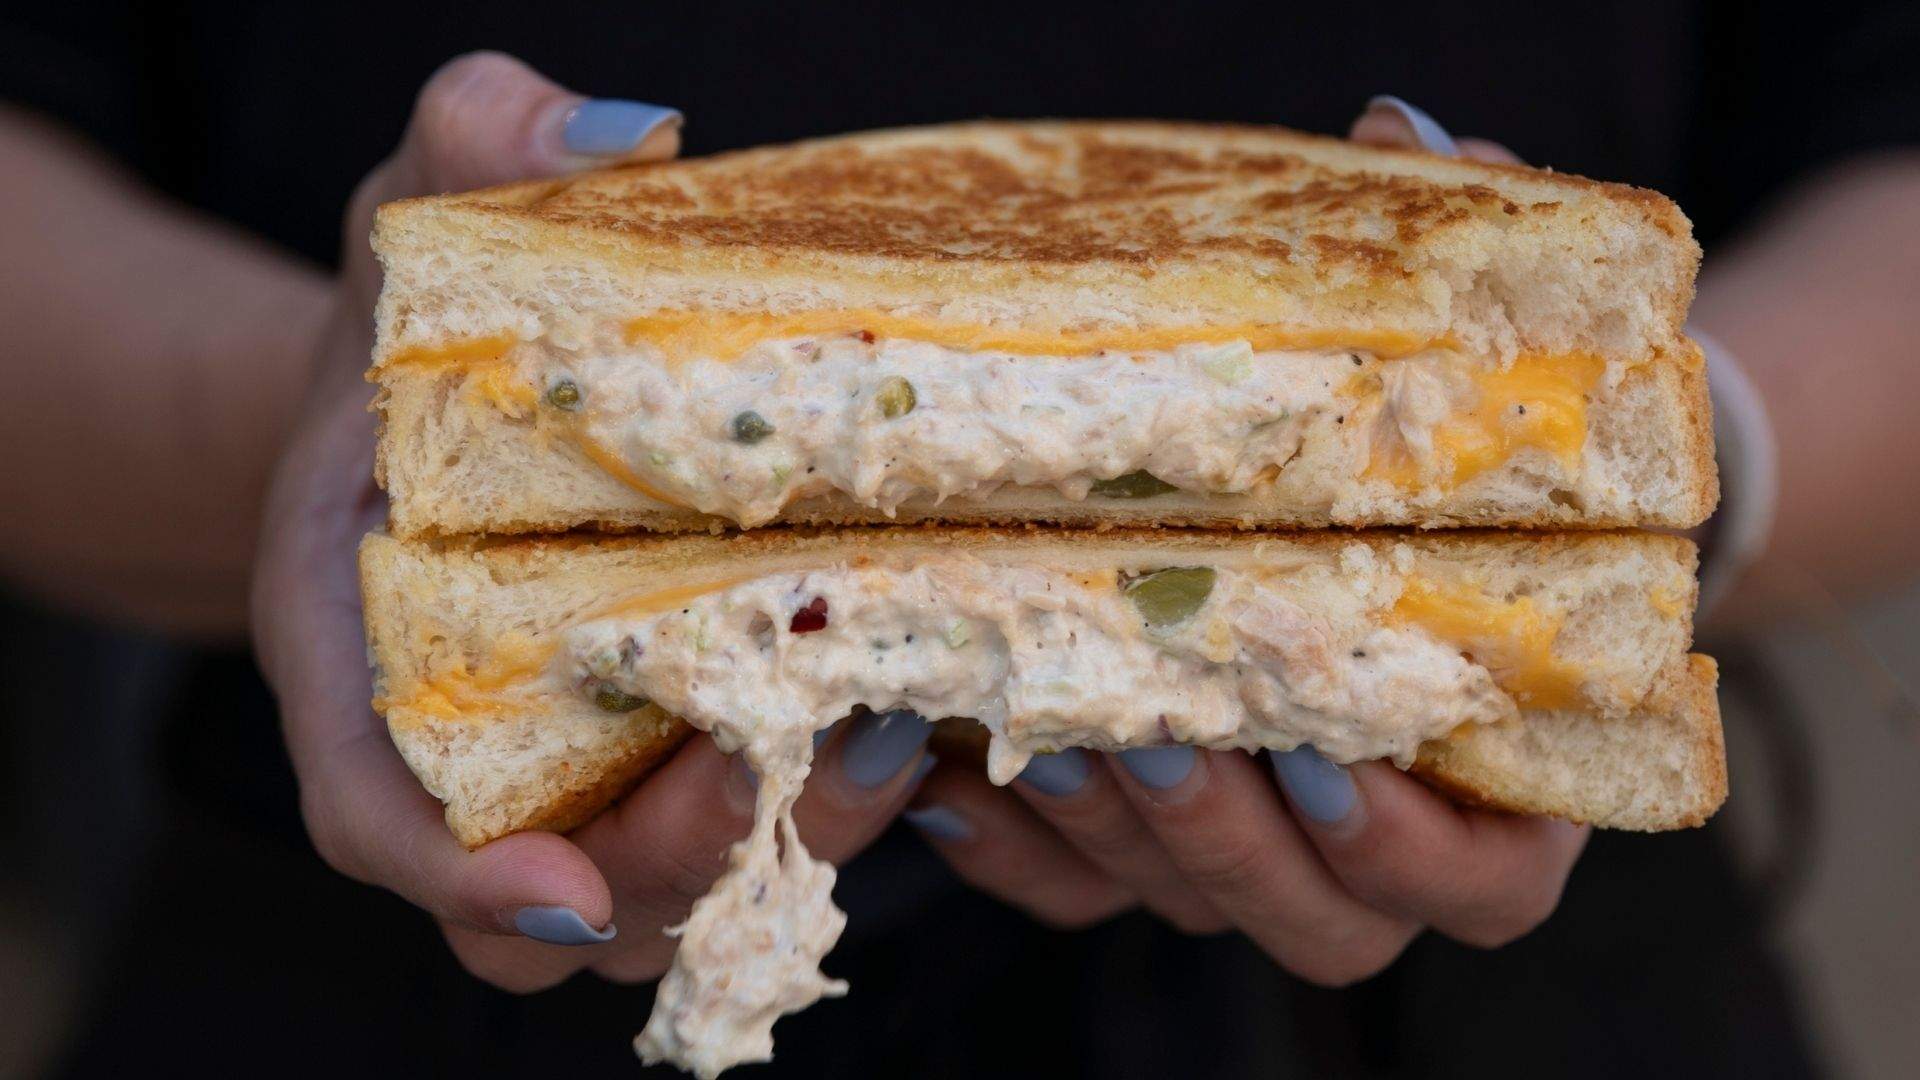 An elevated tuna melt, which packs a punch, boasting the familiar melted cheese and tuna paired with cornichons, capers and chilli sandwiched between two slices of thick white toast from Two Good Cafe Co's october menu by chef Mat Lindsay.